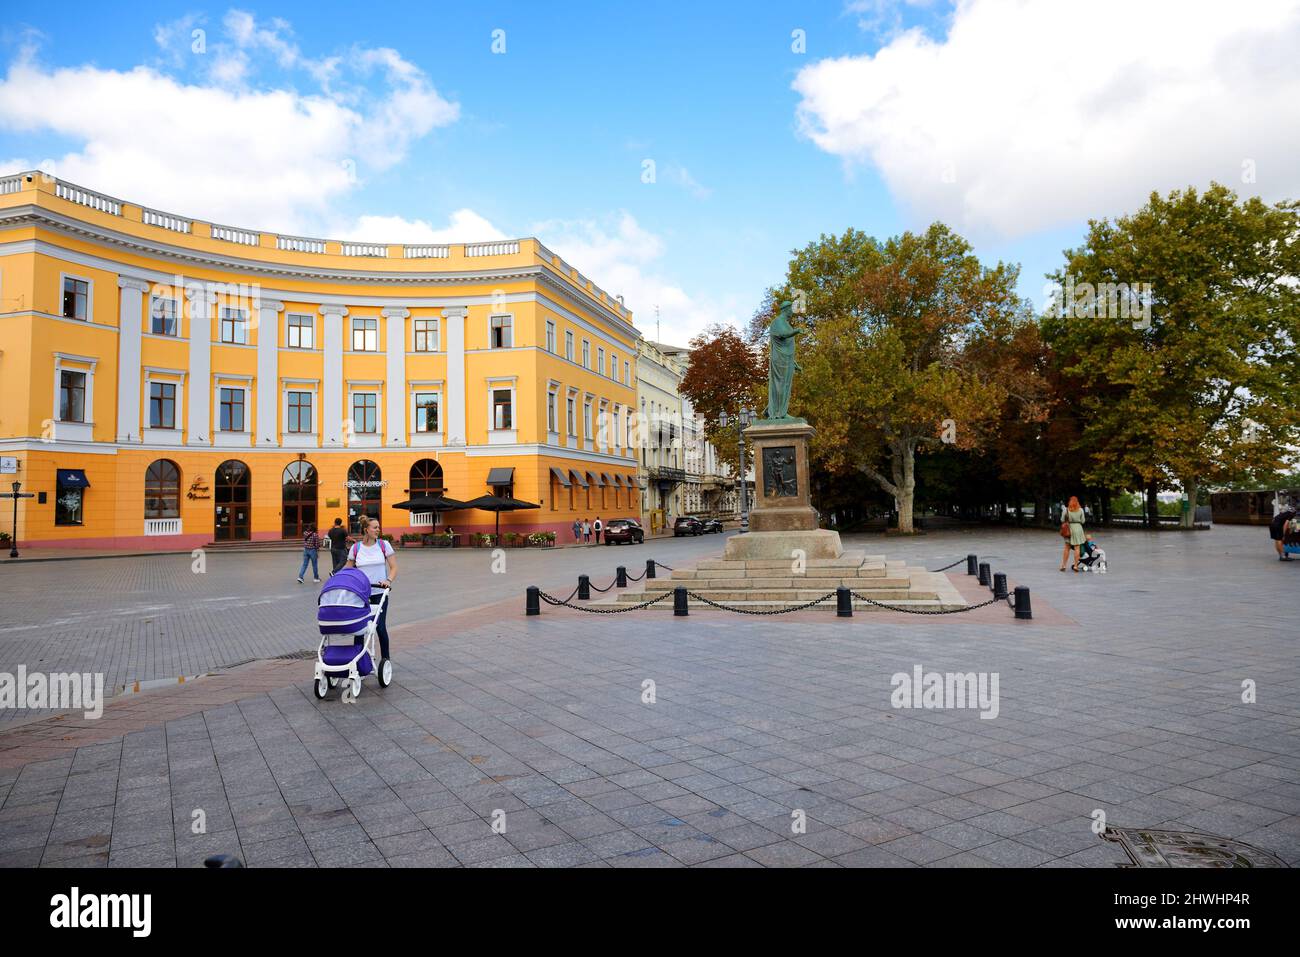 ODESA, UKRAINE - SEPTEMBER 25: The mothers with children and baby carriages are near Monument to Duc de Richelieu on September 25, 2020 in Odesa, Ukra Stock Photo